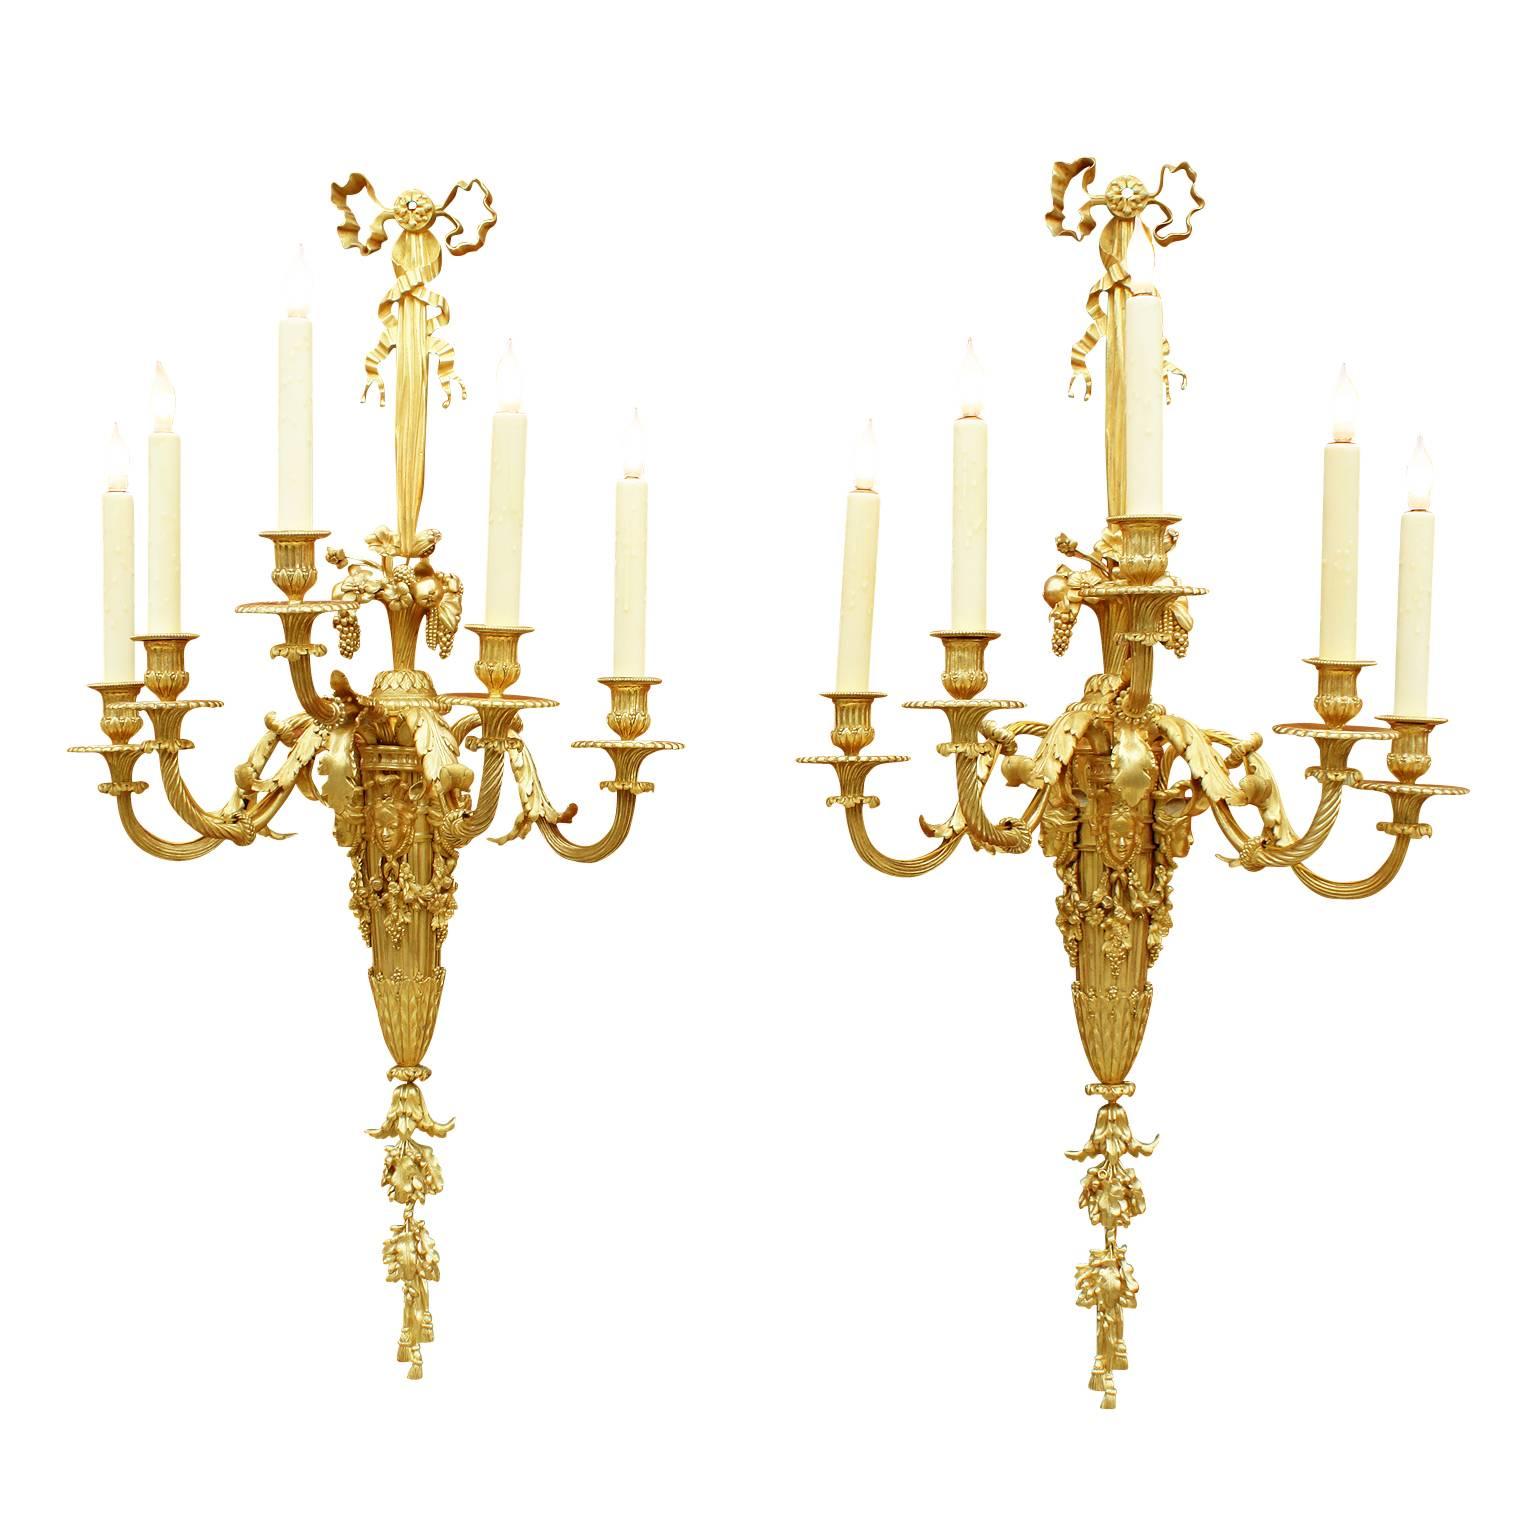 Pair of French 19th Century Louis XVI Style Figural Wall Lights after Thomire